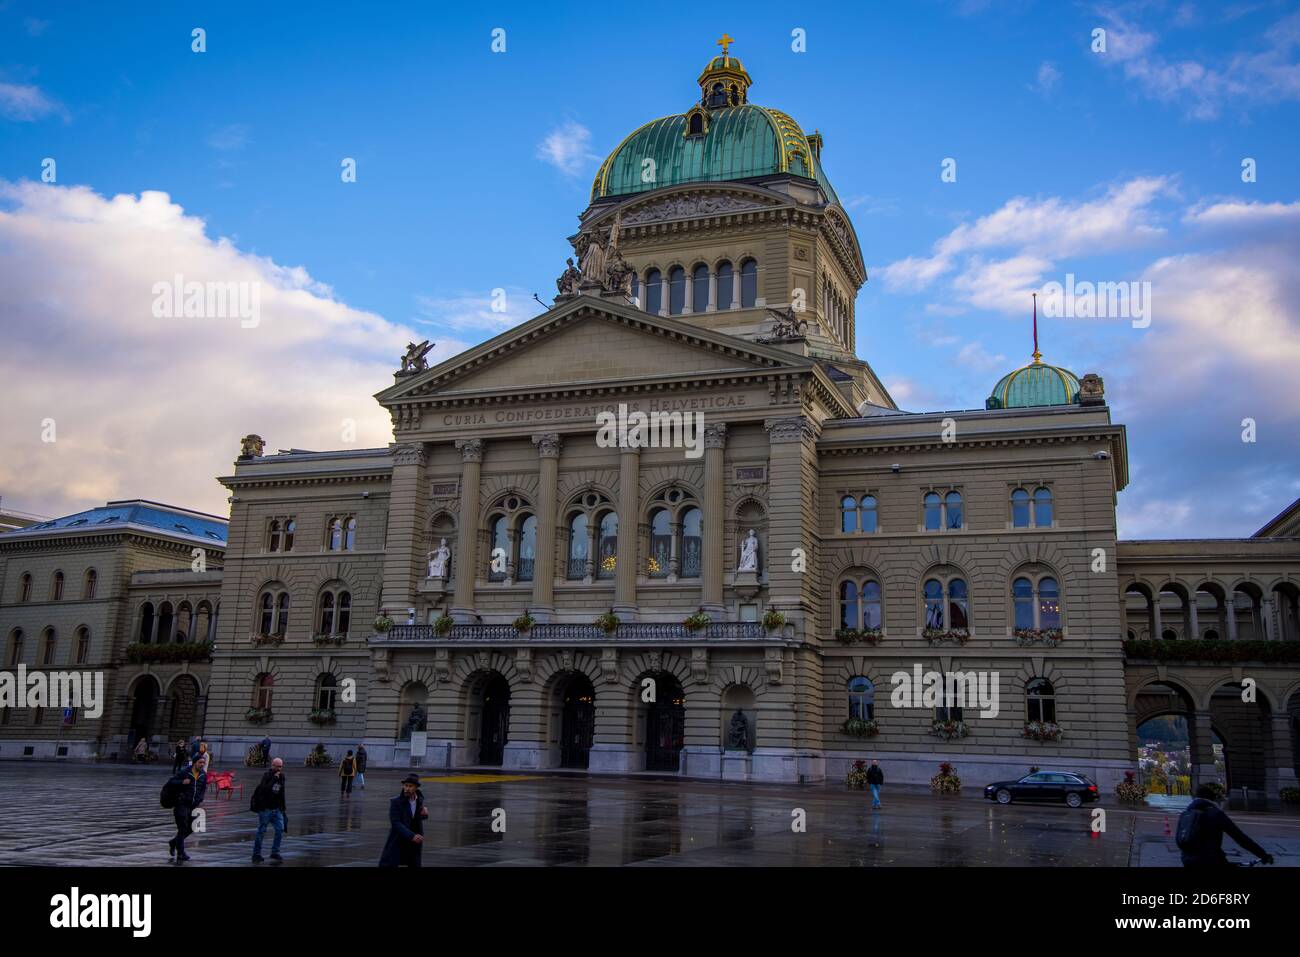 Parliament building in the city of Bern - the capital city of Switzerland - COUNTY OF BERN. SWITZERLAND - OCTOBER 9, 2020 Stock Photo